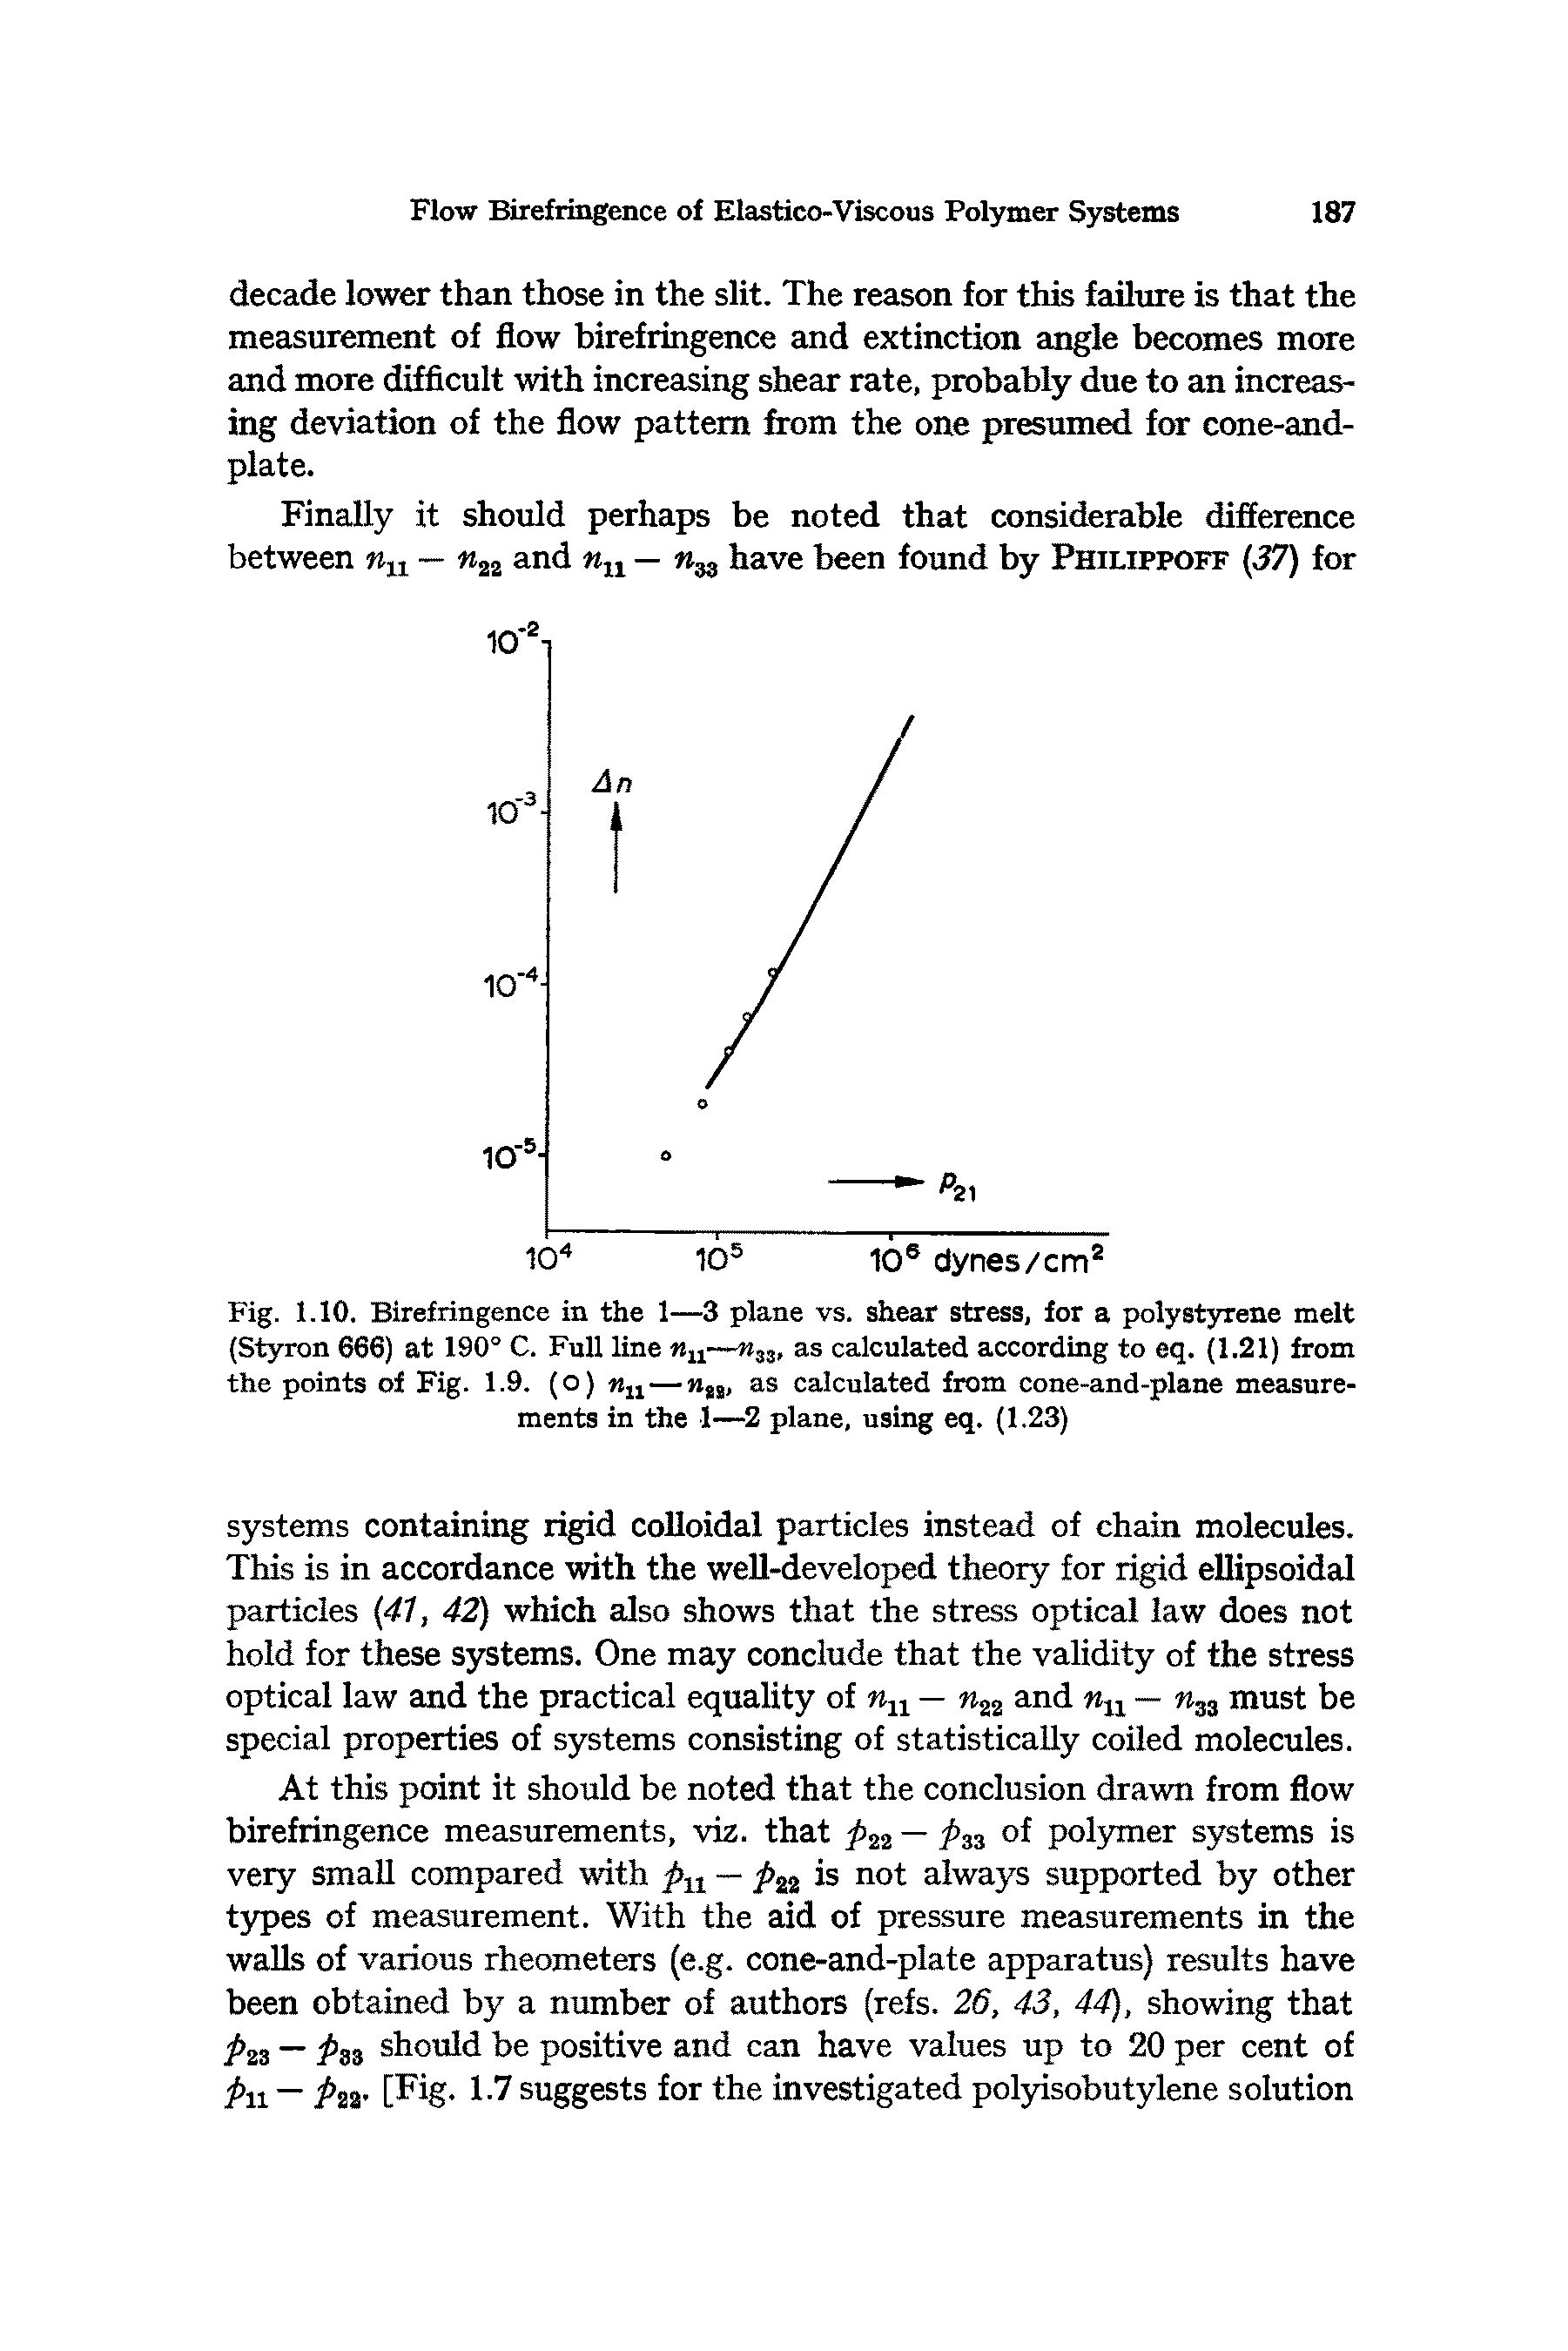 Fig. 1.10. Birefringence in the 1—3 plane vs. shear stress, for a polystyrene melt (Styron 666) at 190° C. Full line nu—nn, as calculated according to eq. (1.21) from the points of Fig. 1.9. (o) u — n a, as calculated from cone-and-plane measurements in the 1—2 plane, using eq. (1.23)...